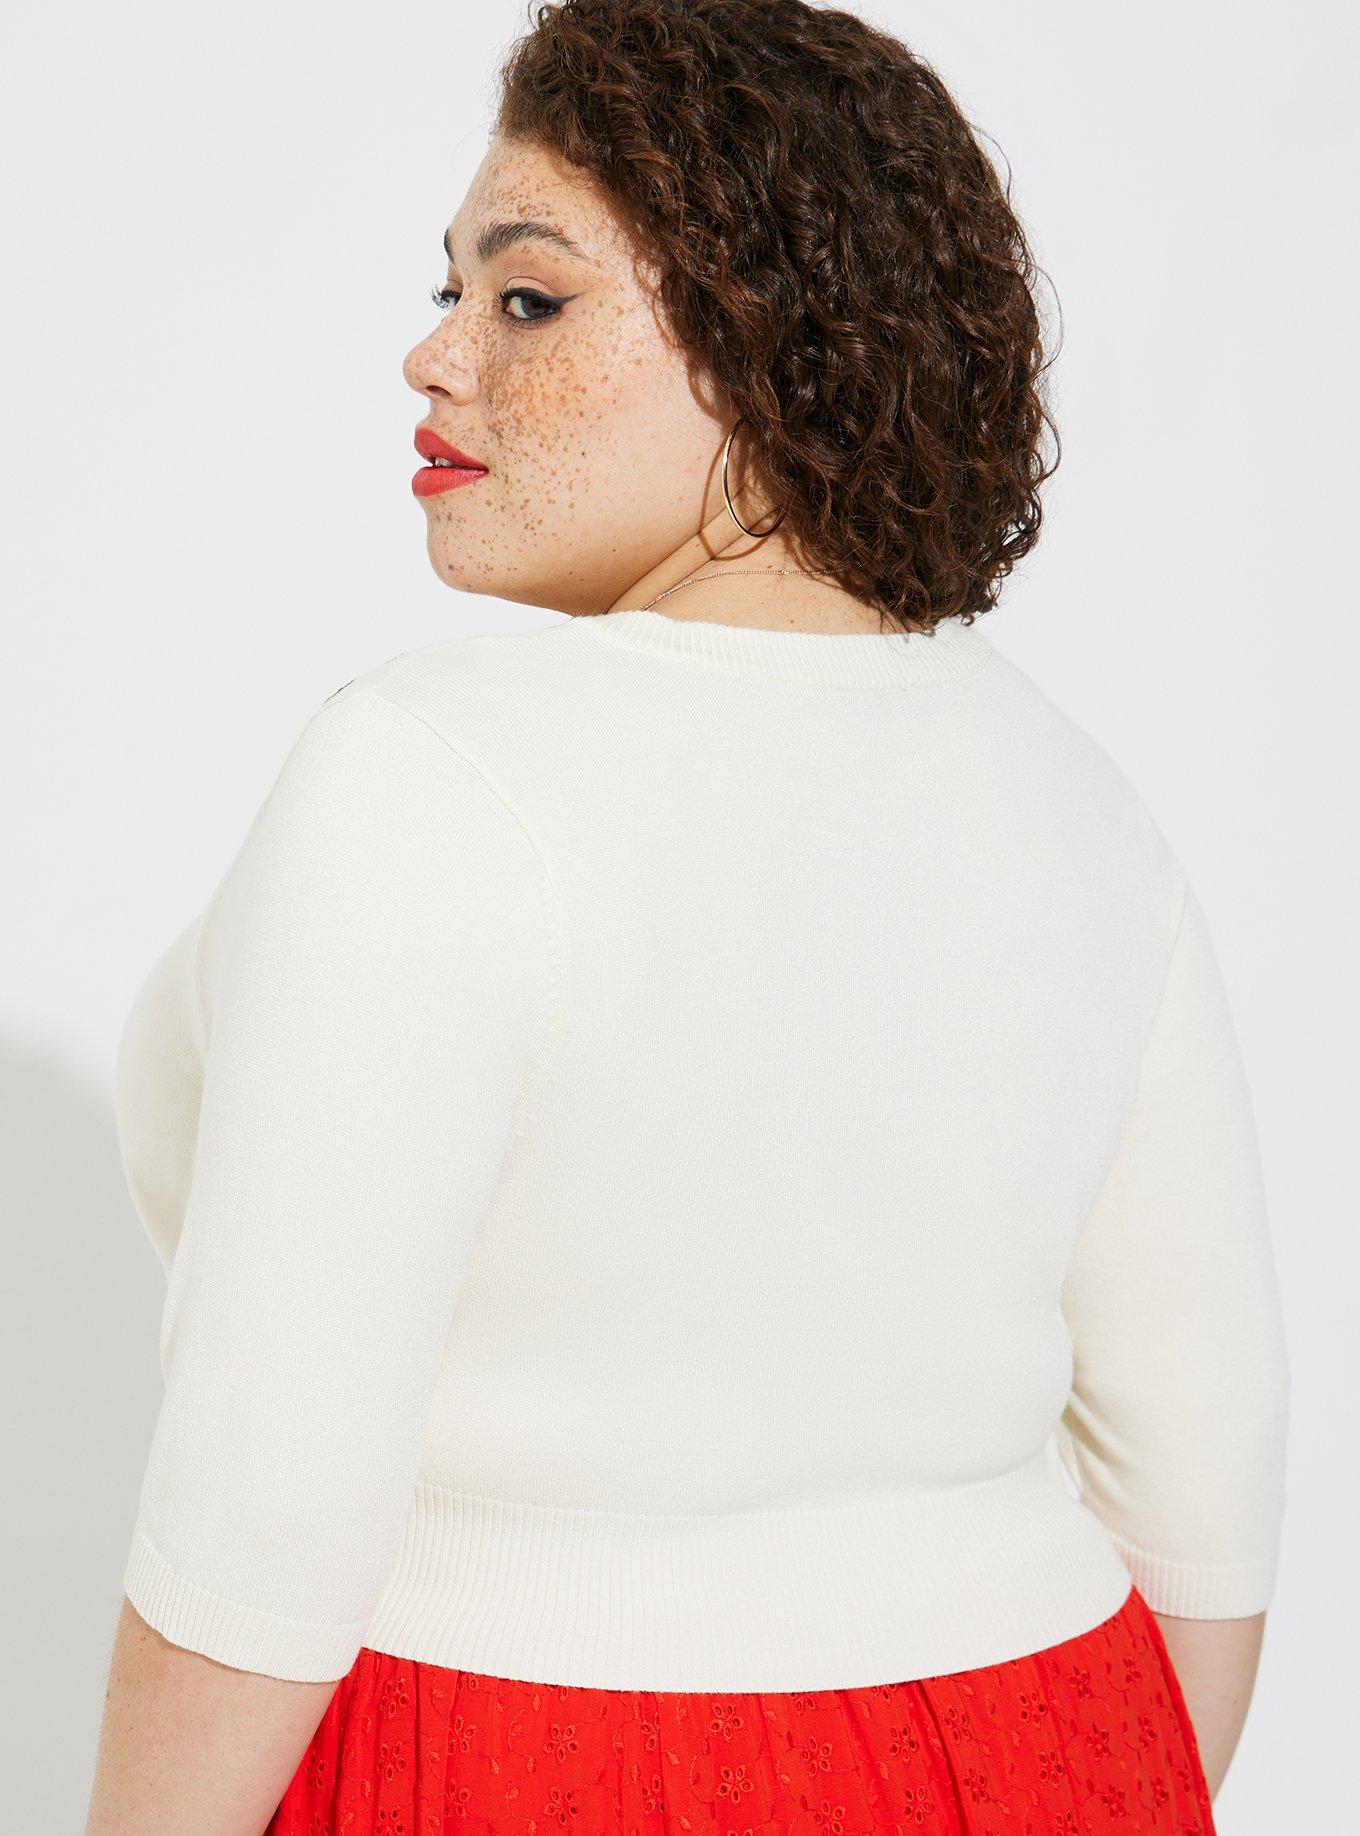 Plus Size - Retro Cropped Cardigan Embroidered Sweater - Torrid